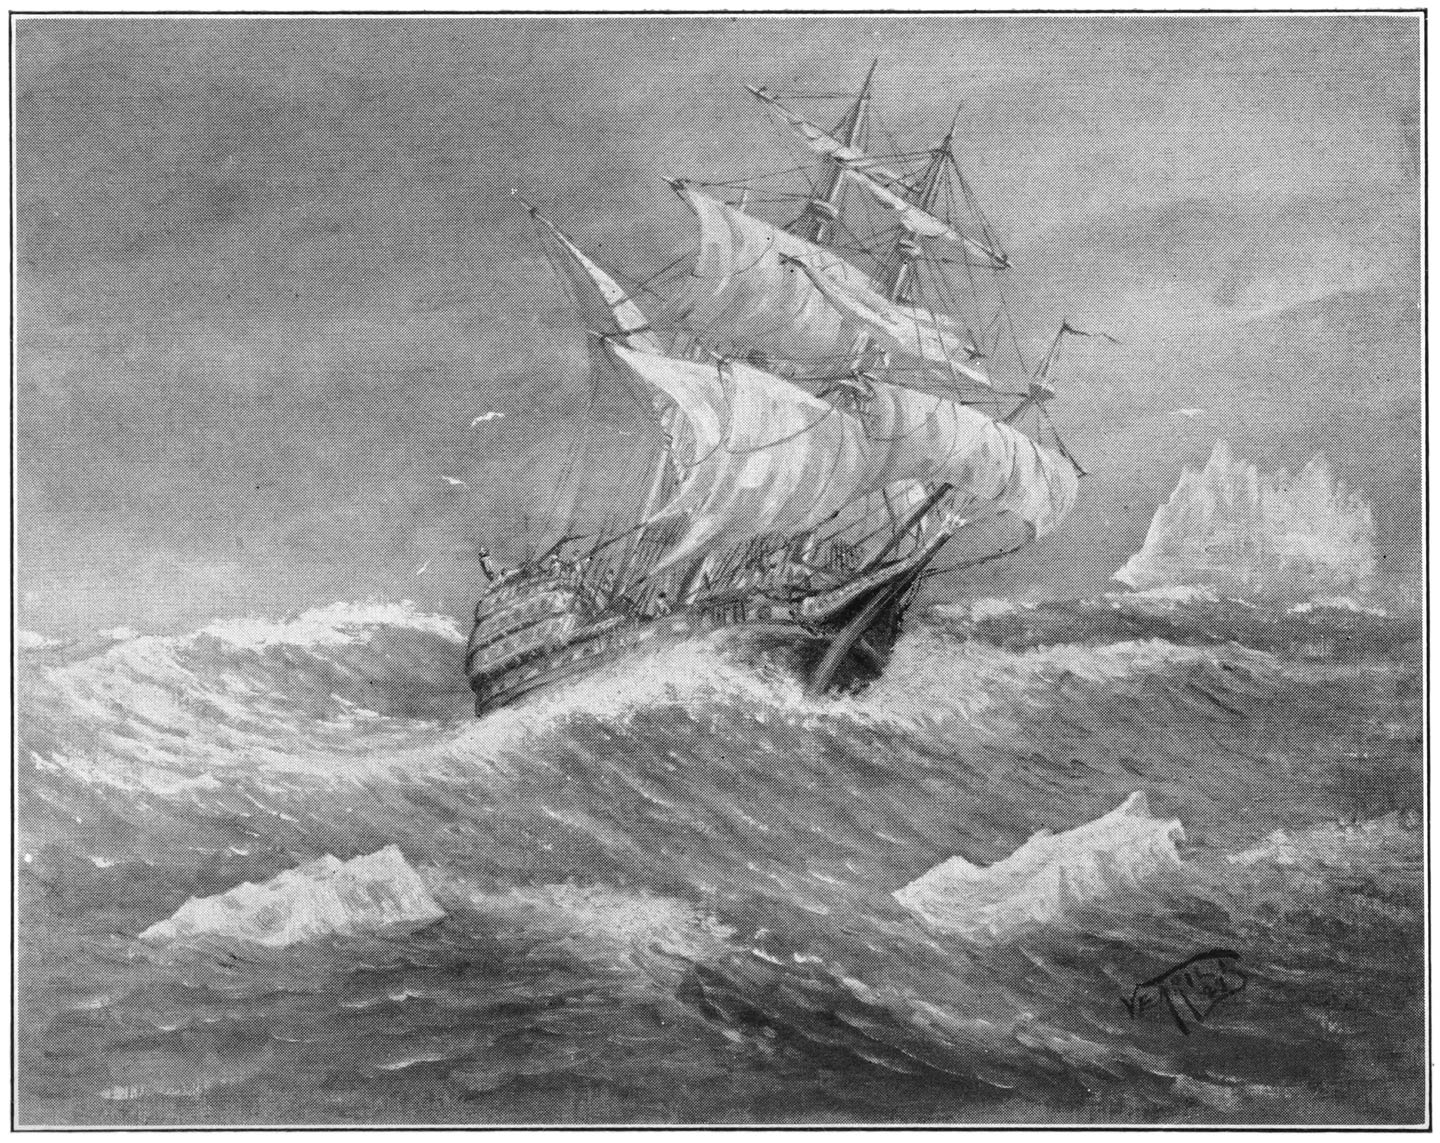 The battered, patched old galleon sailed southward around Cape Horn